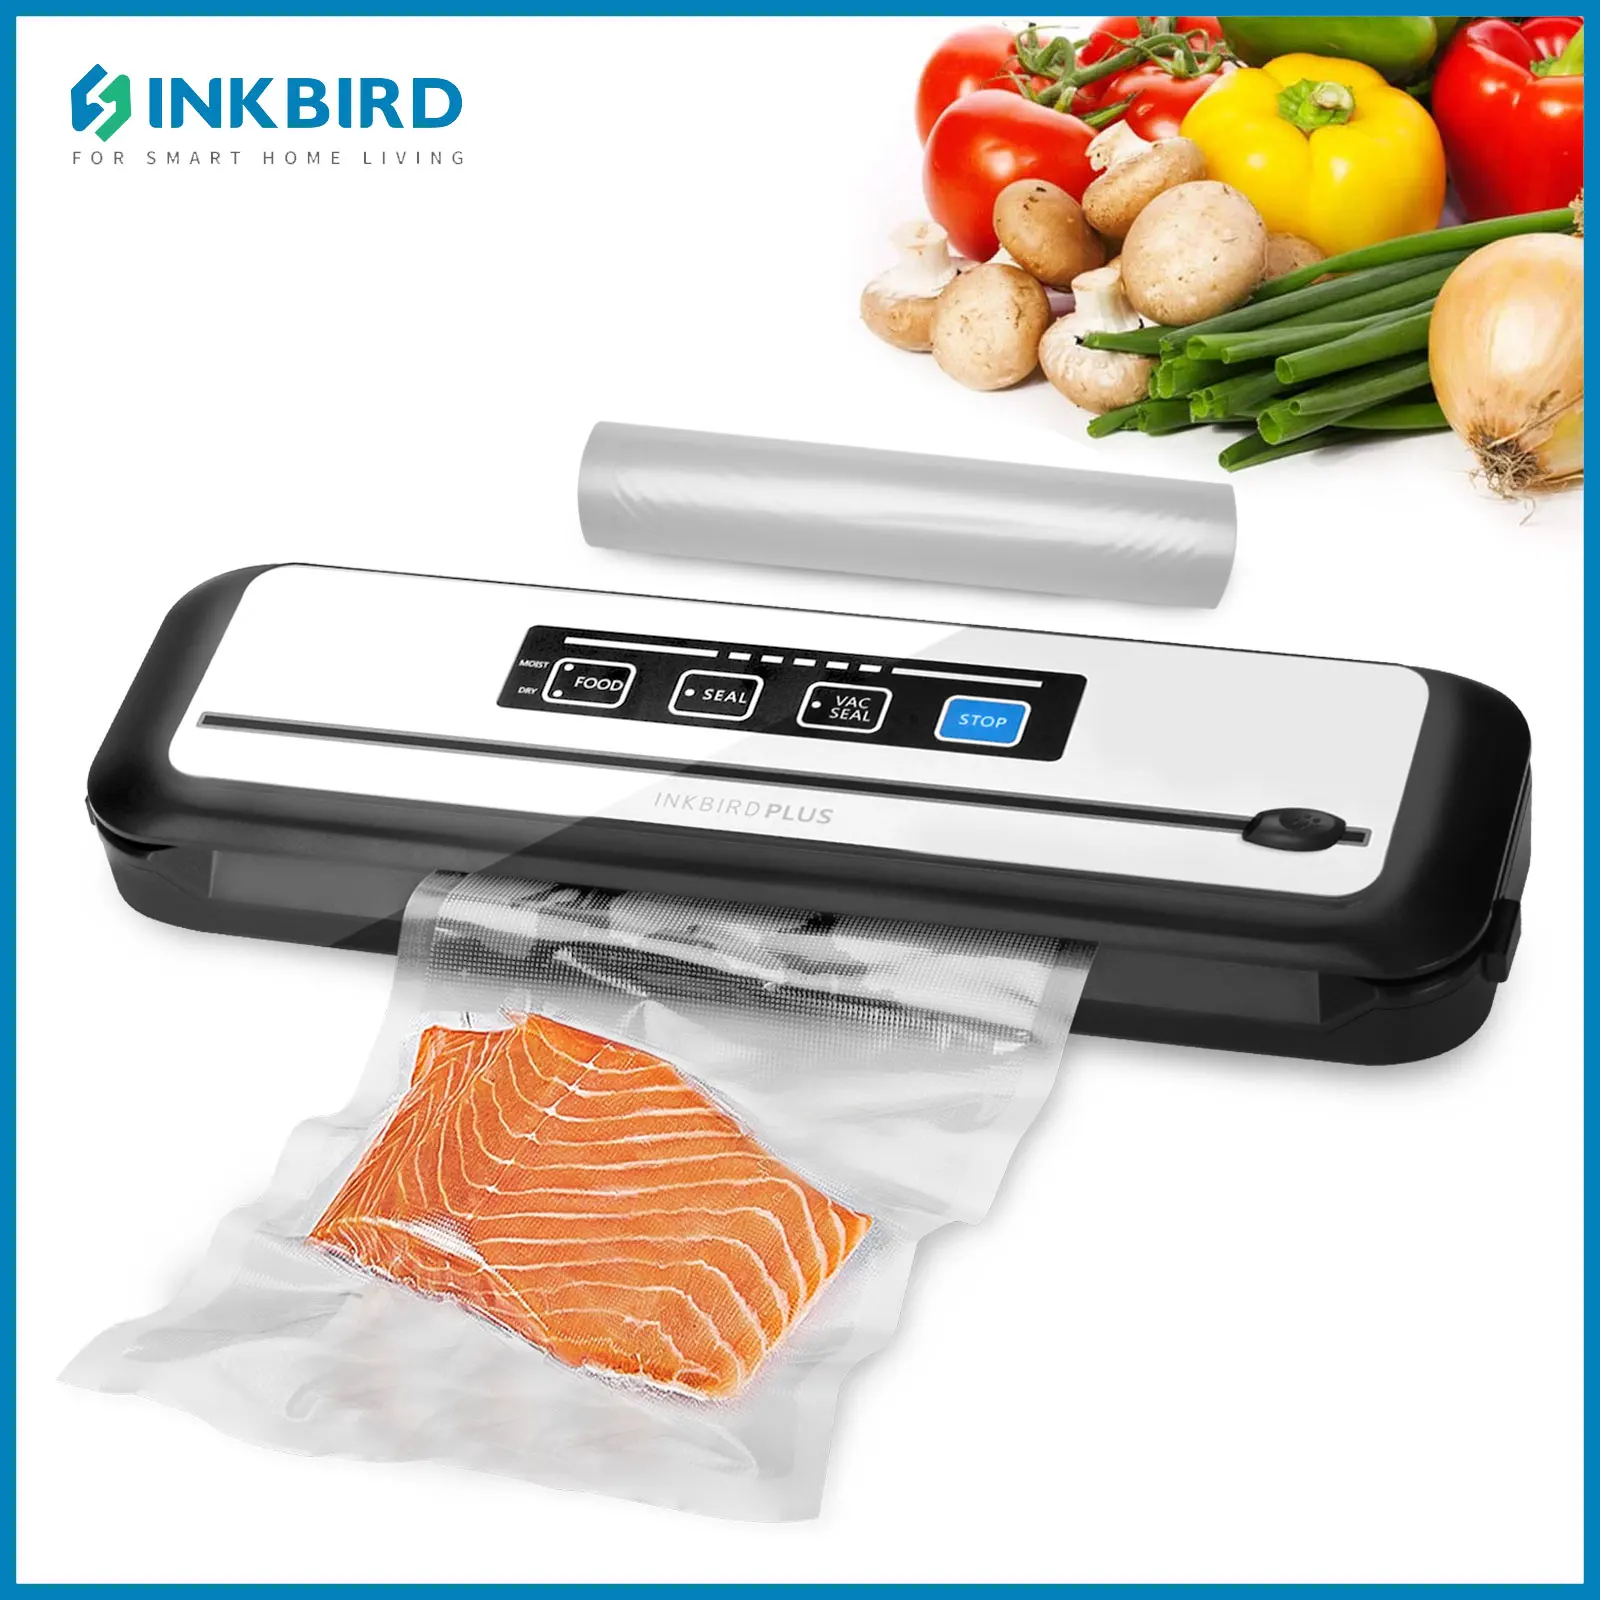 

INKBIRD INK-VS01 Vacuum Sealer Automatic Sealing Machine for Food Preservation Dry Moist Multiple Modes Electric Sealing Machine